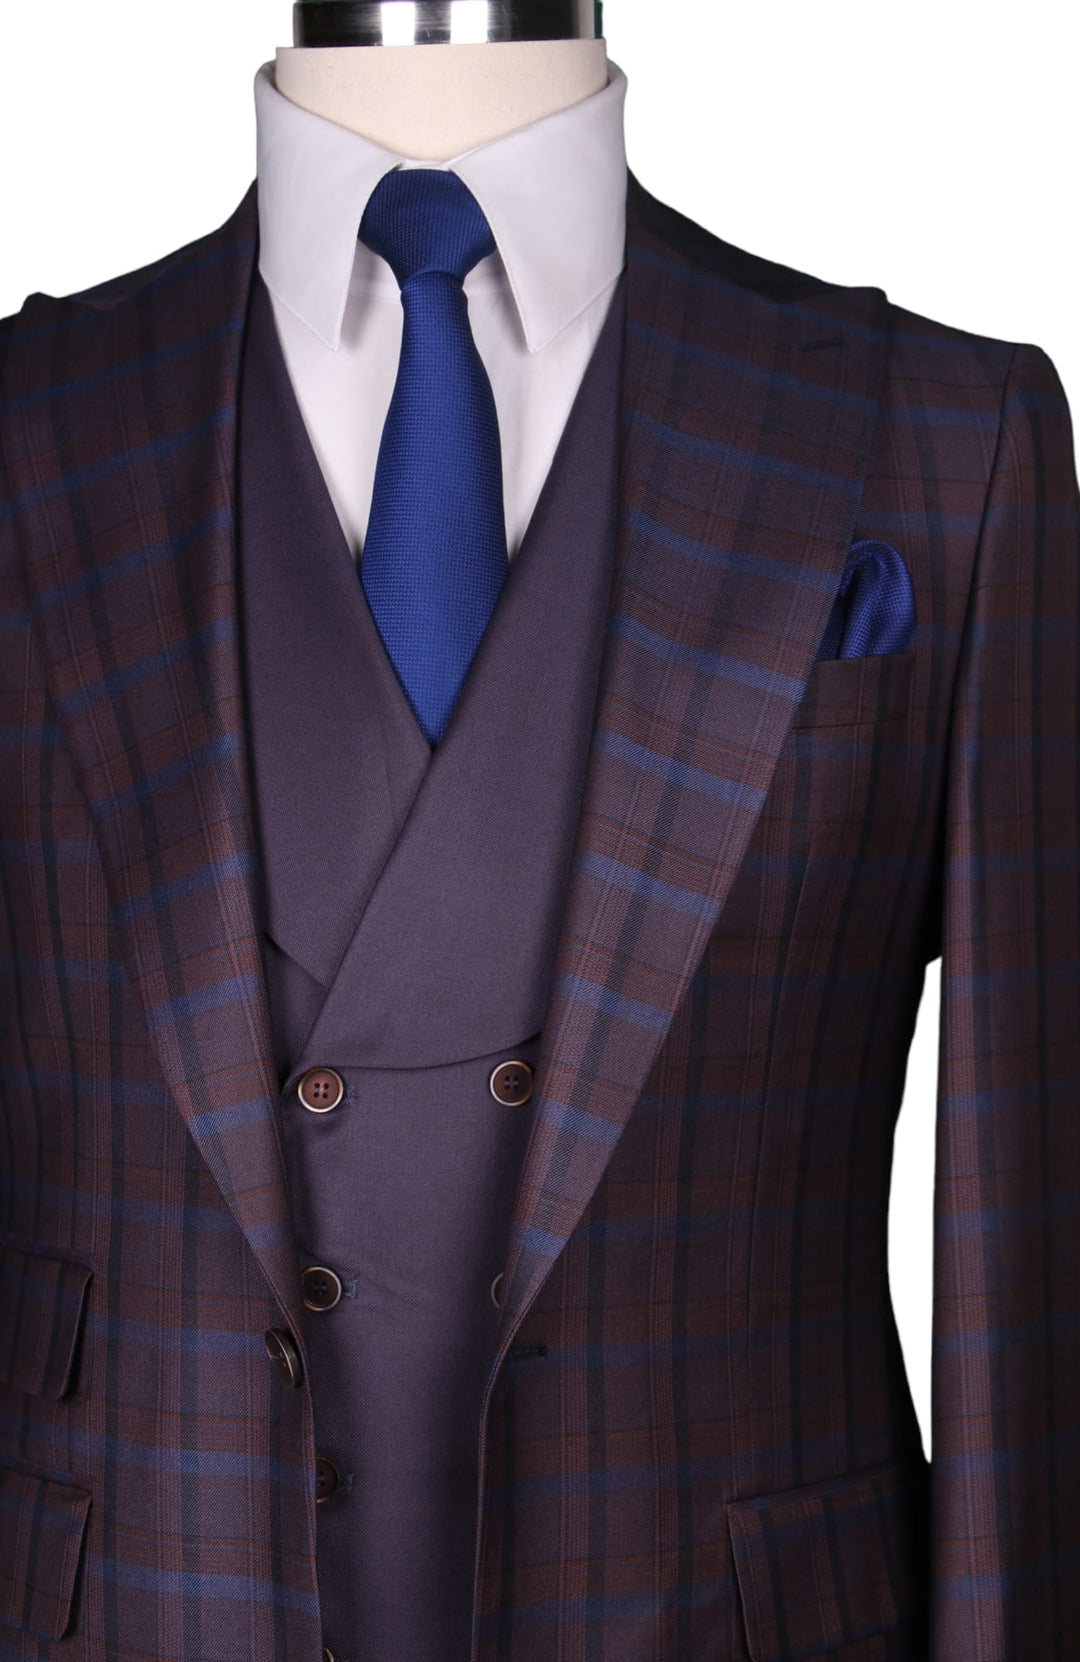 3 Piece Two Tone Brown Suit with Blue Stripe